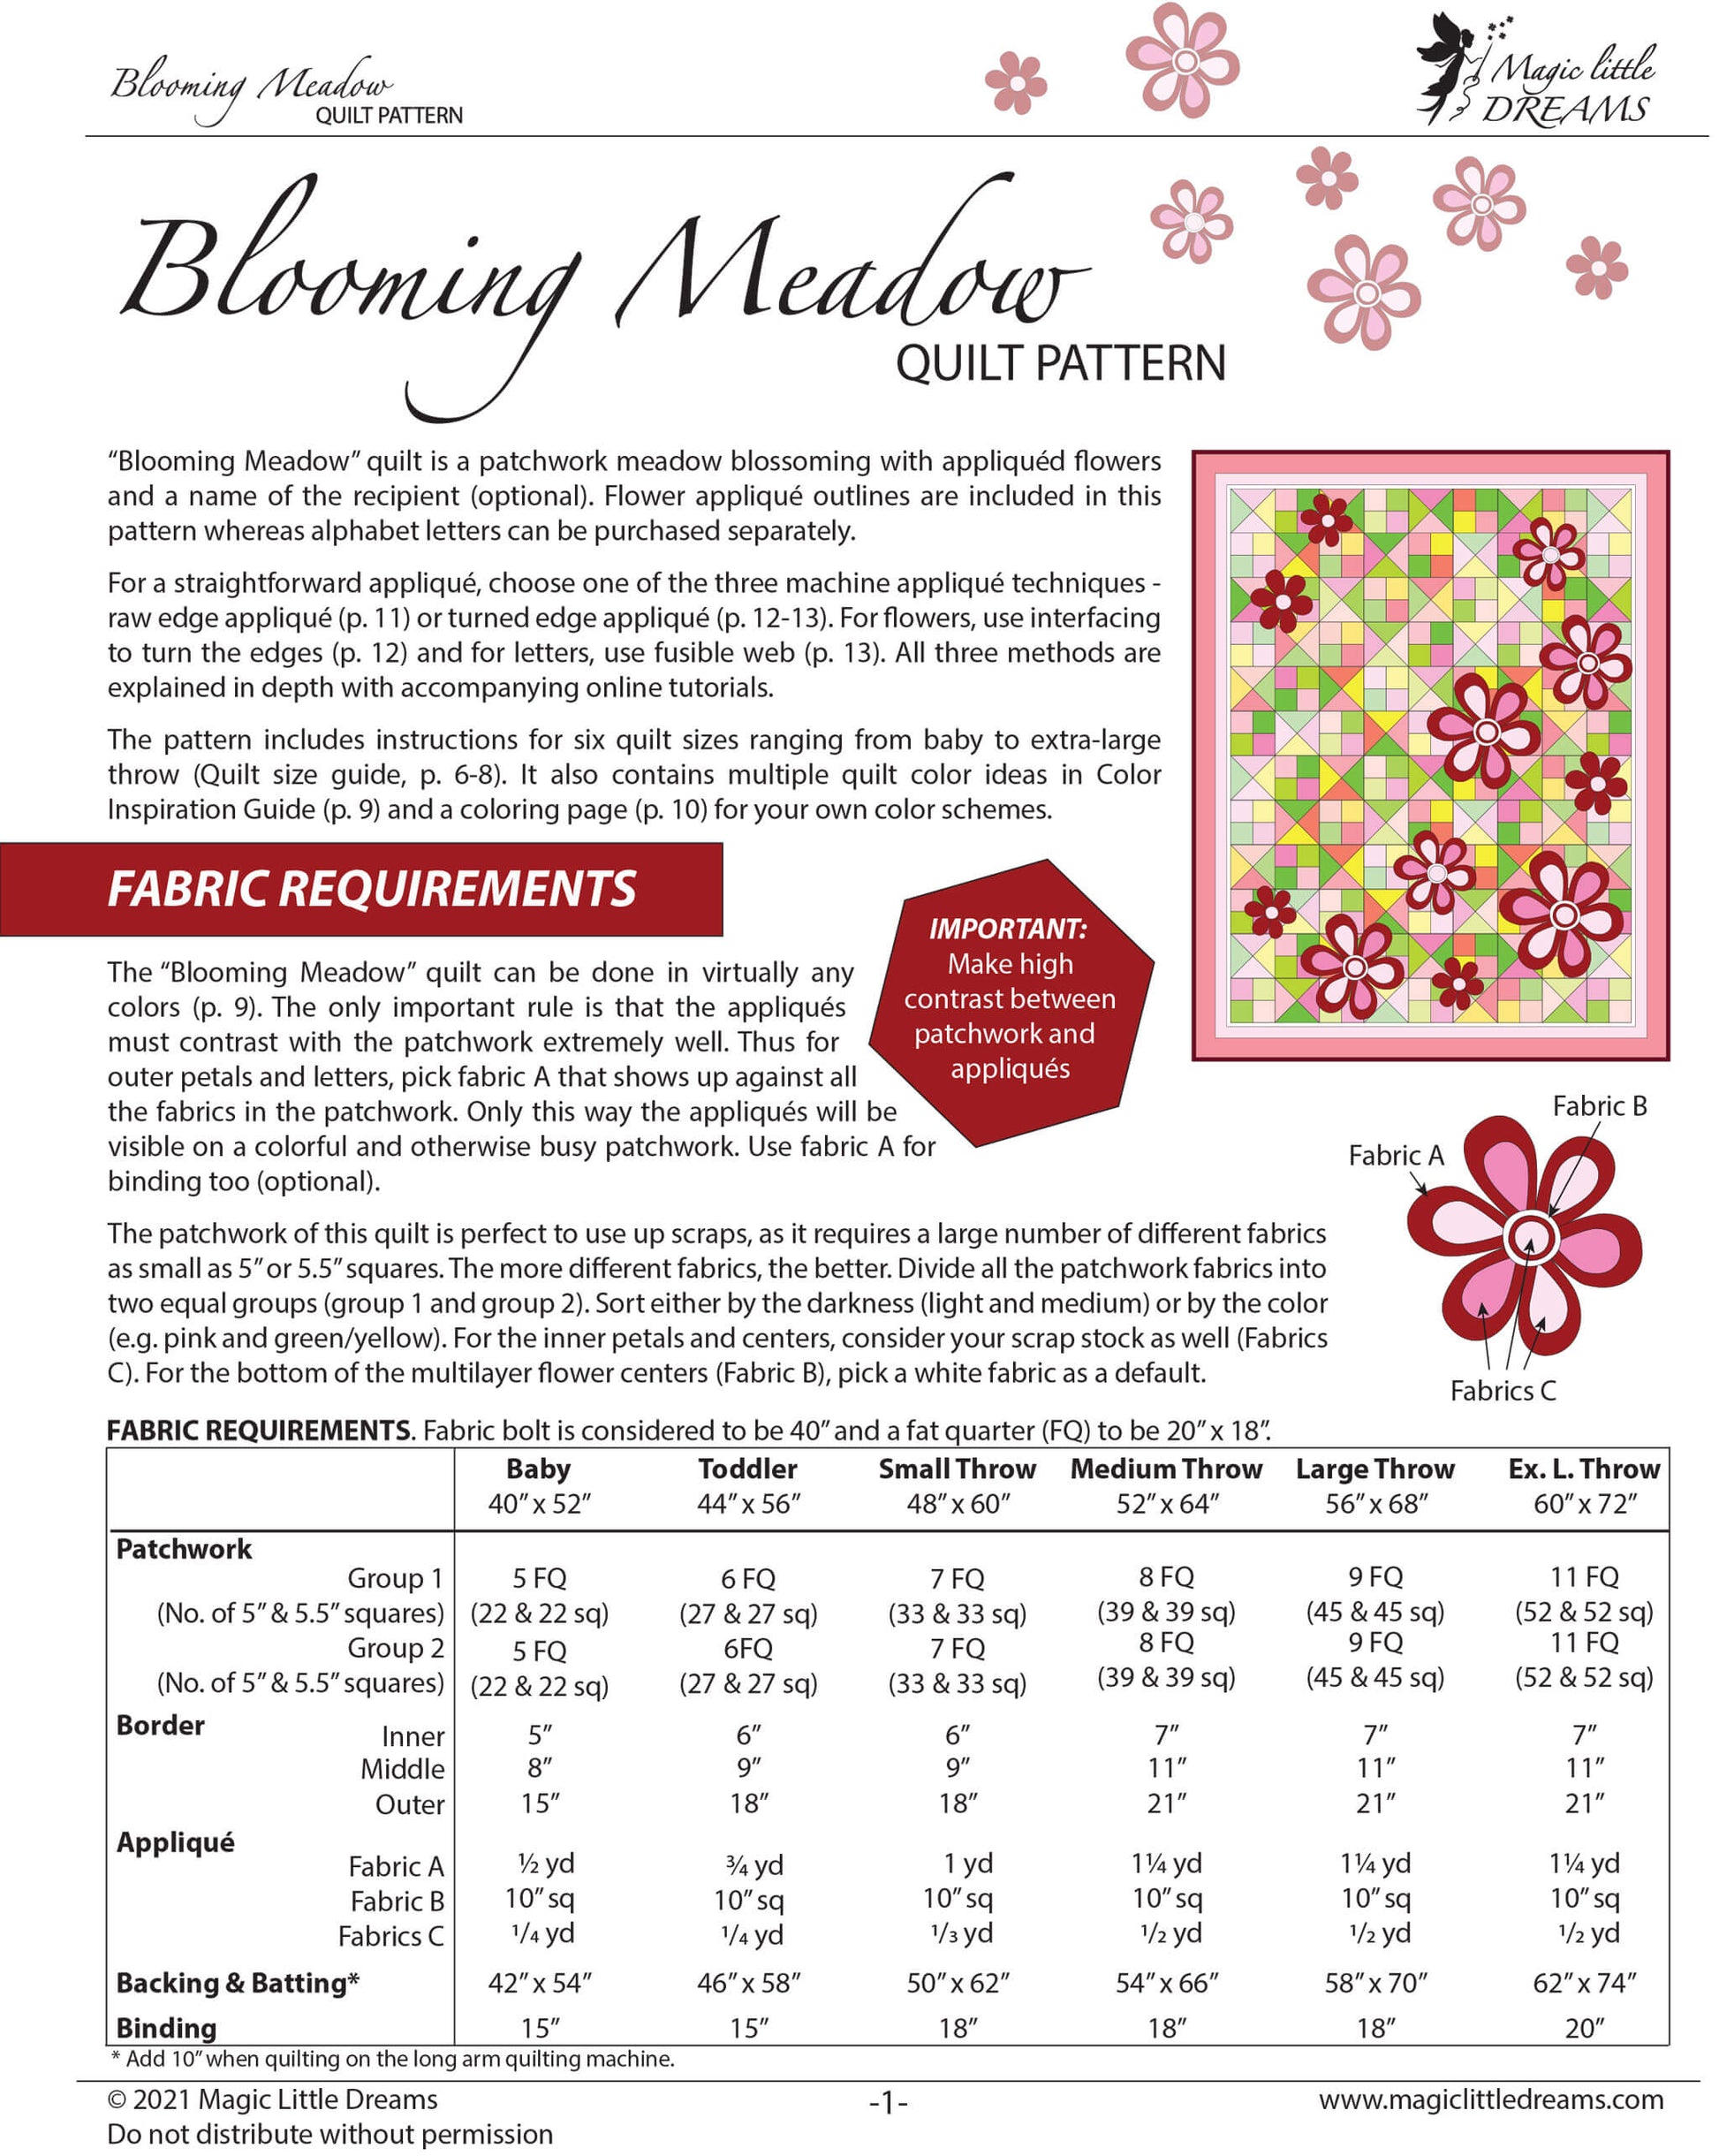 1st page of "Blooming "meadow" quilt pattern with fabric requirements